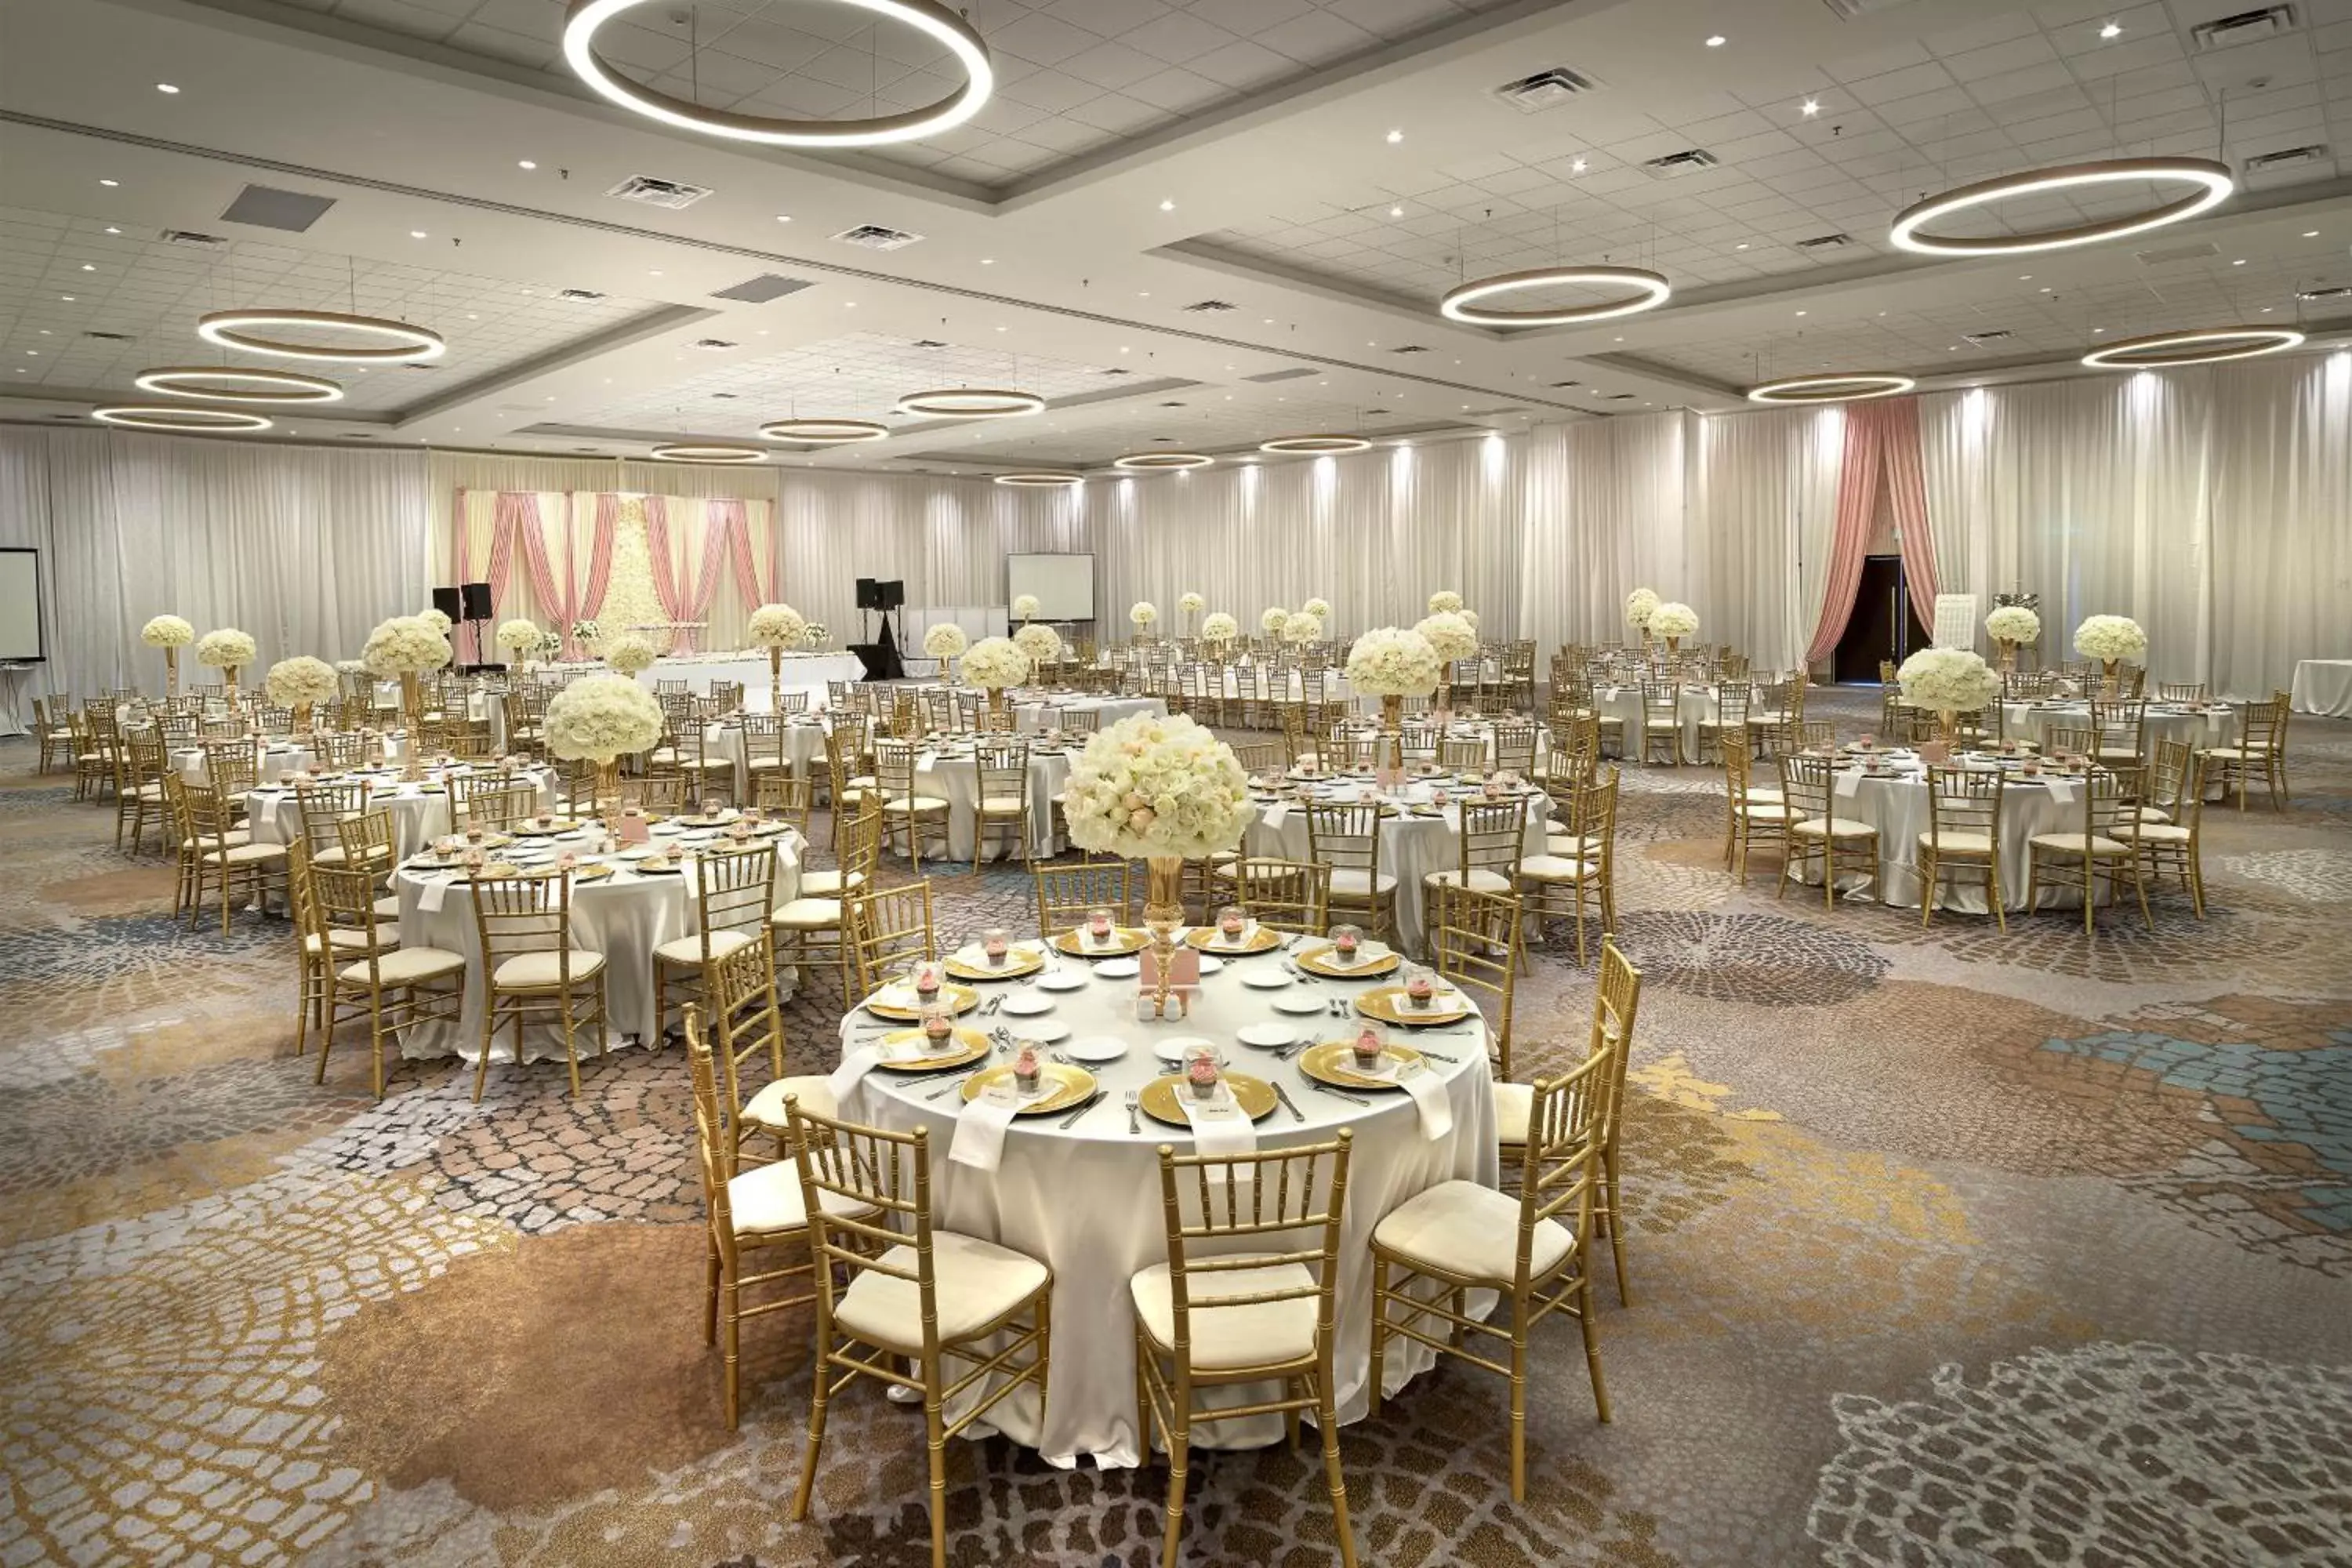 Banquet/Function facilities, Banquet Facilities in The Westin Calgary Airport